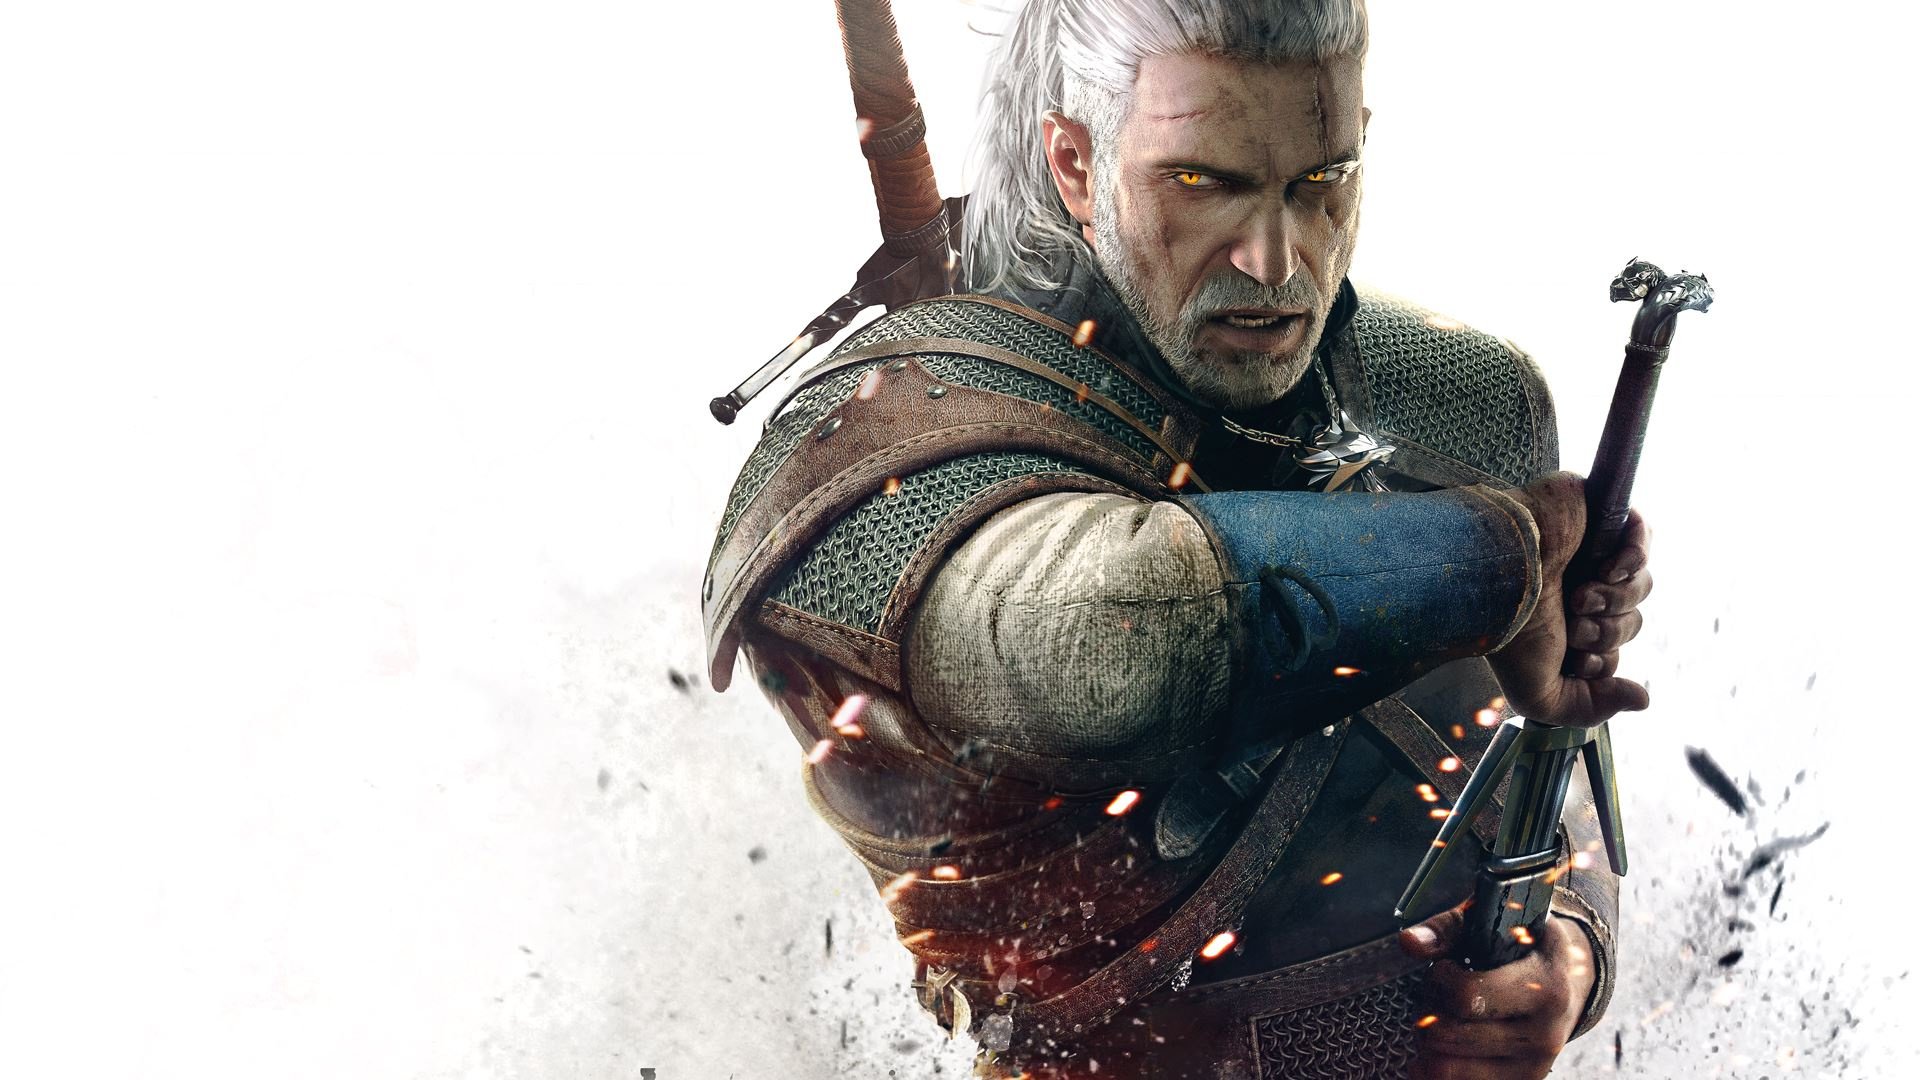 the witcher 3 playstation 5